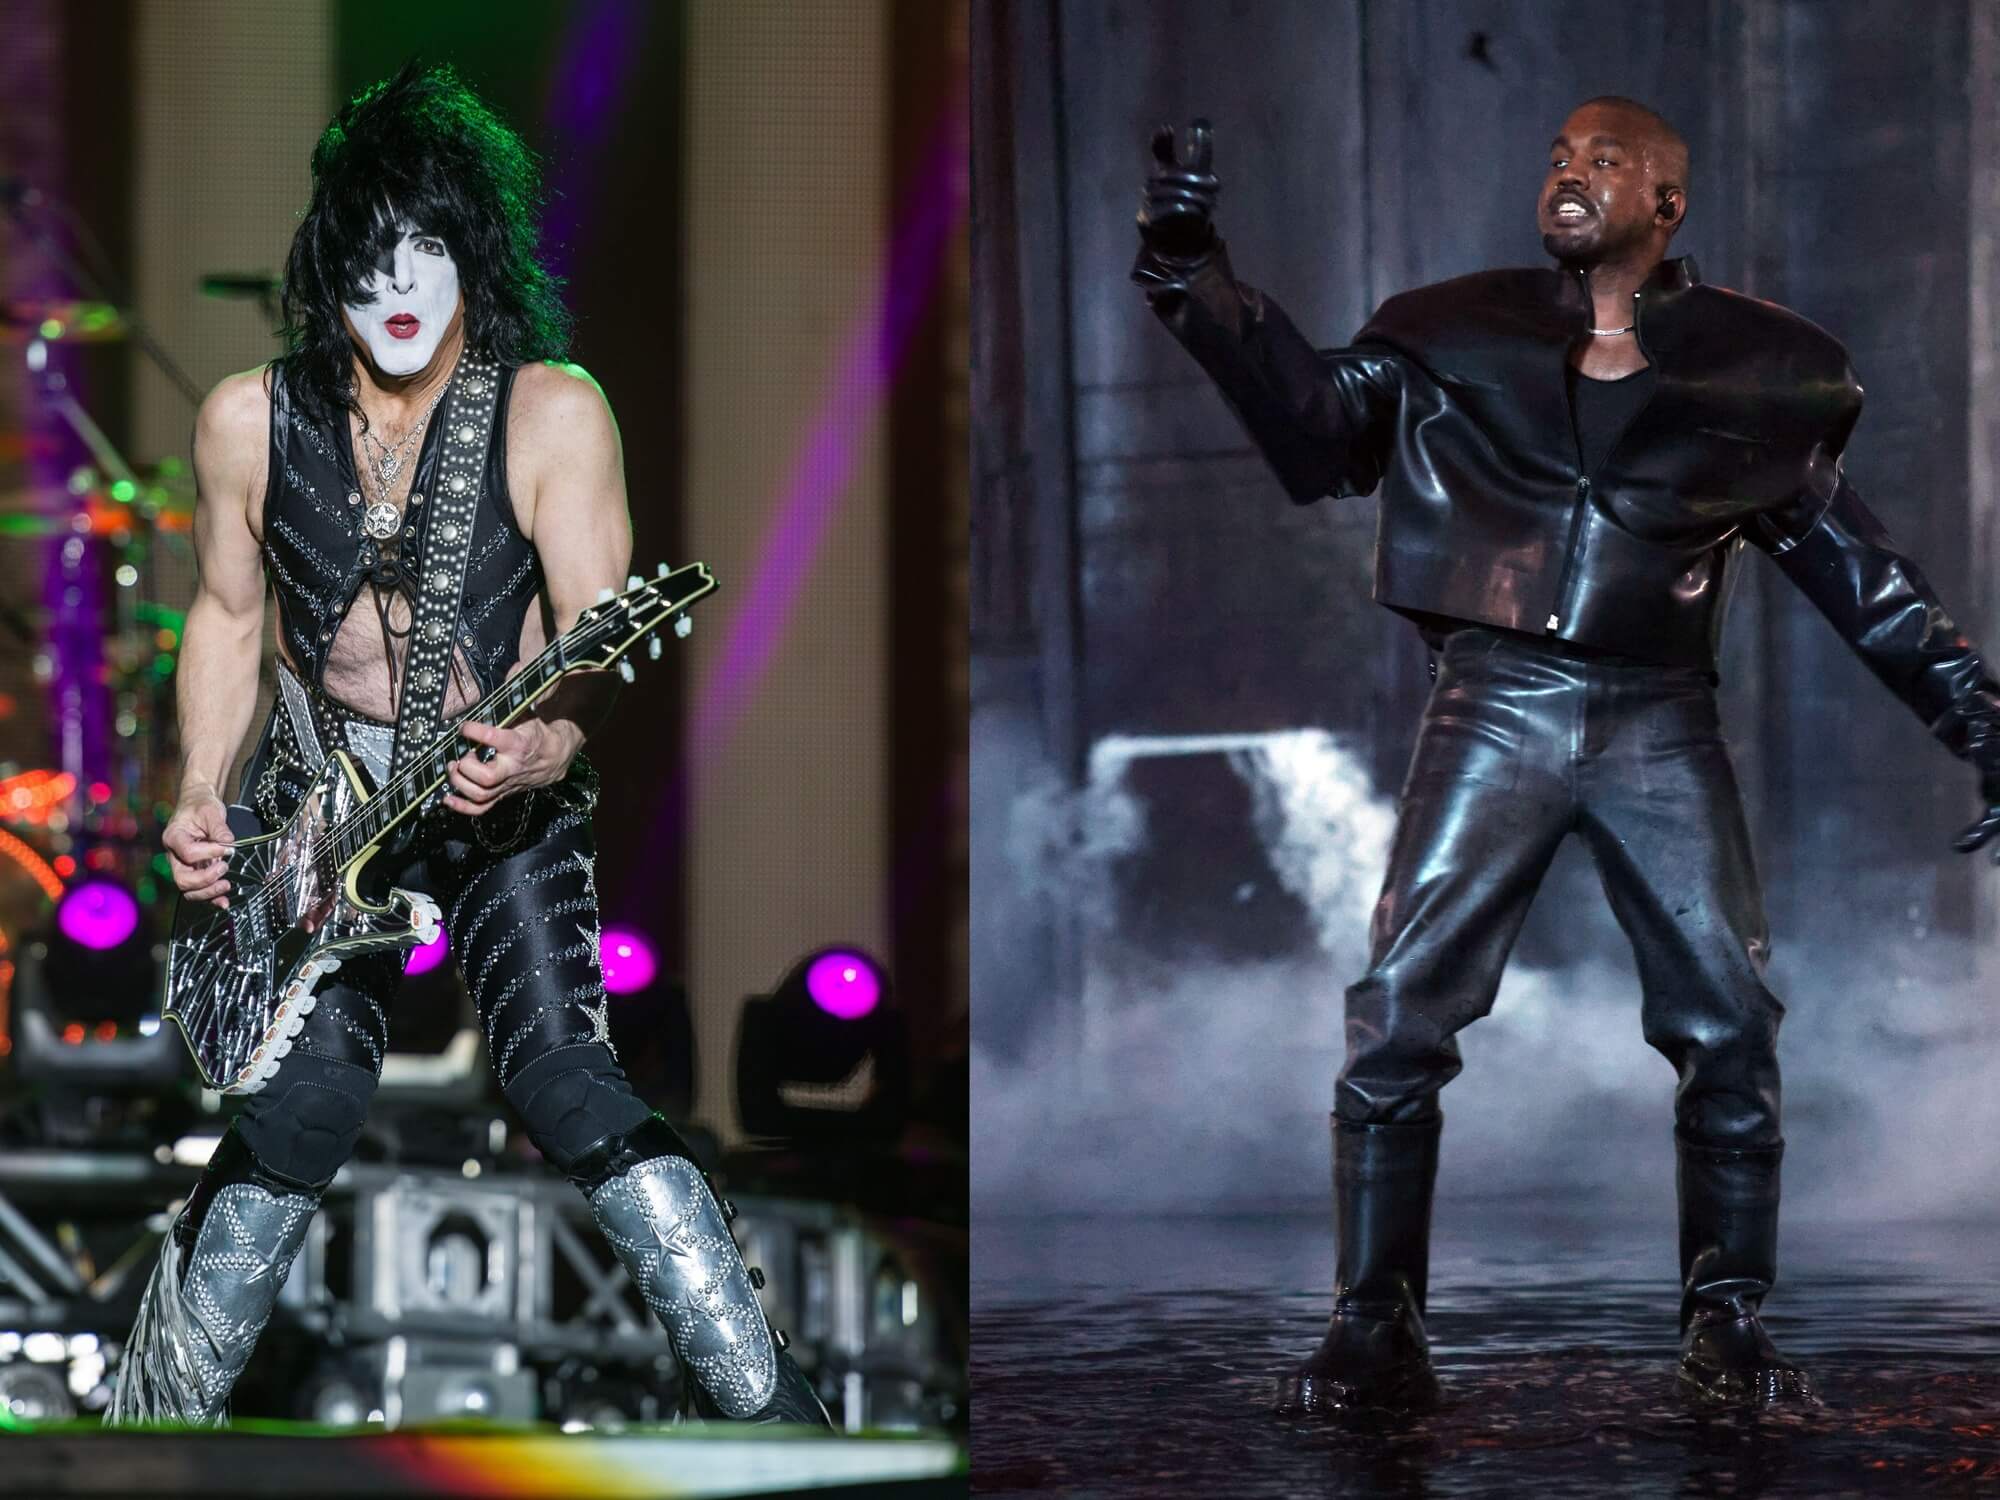 KISS' Paul Stanley and Kanye West